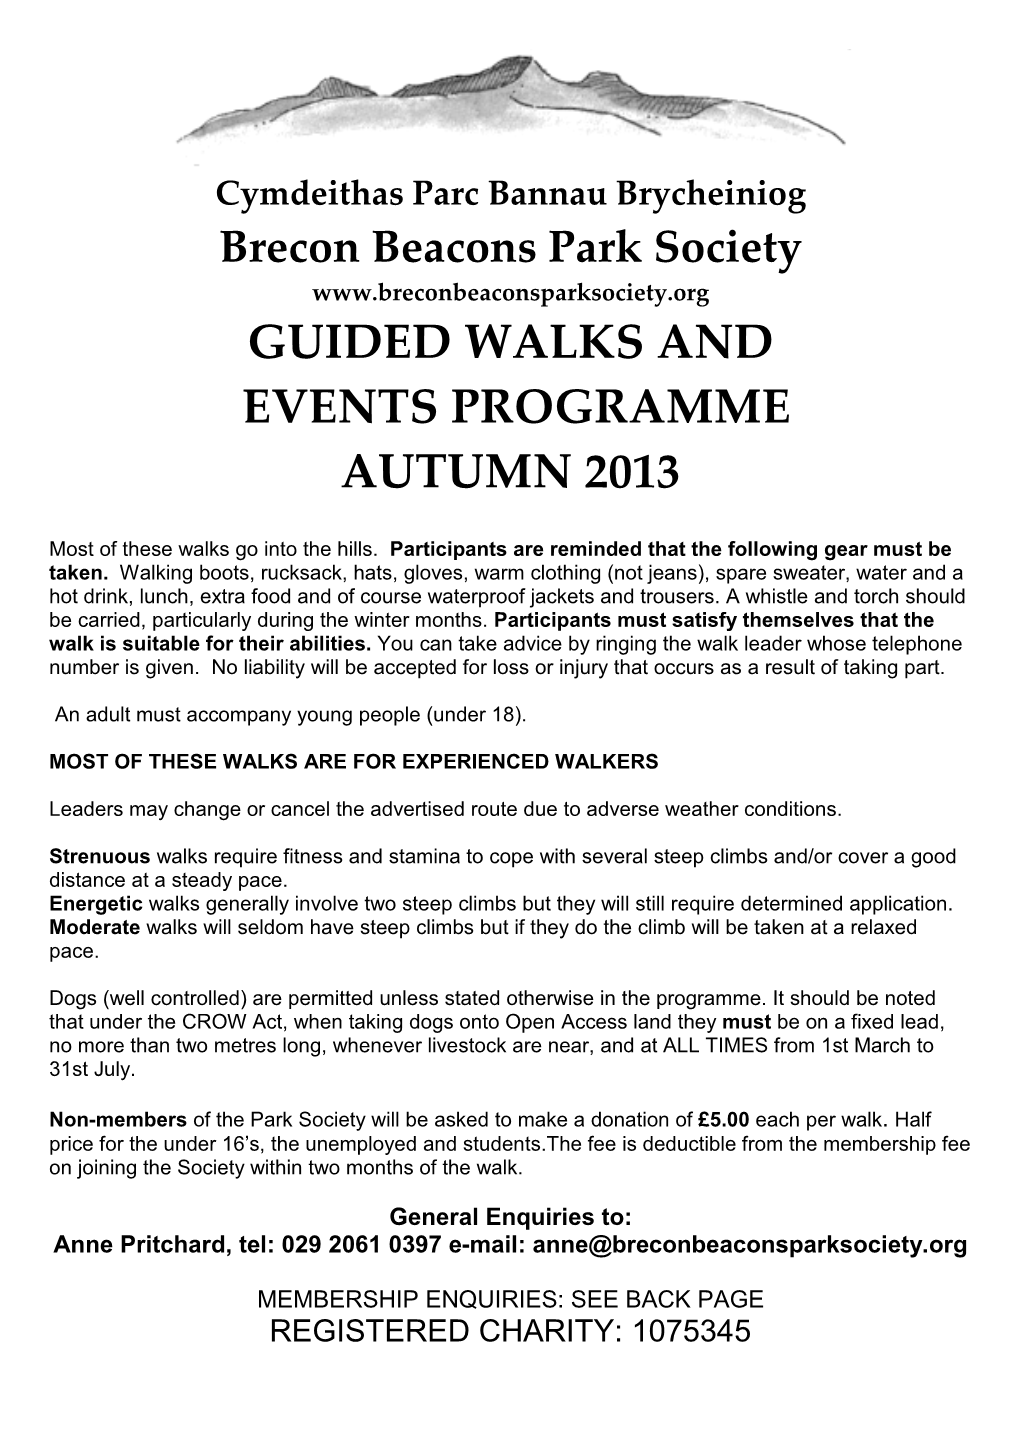 Guided Walks and Events Programme Autumn 2013